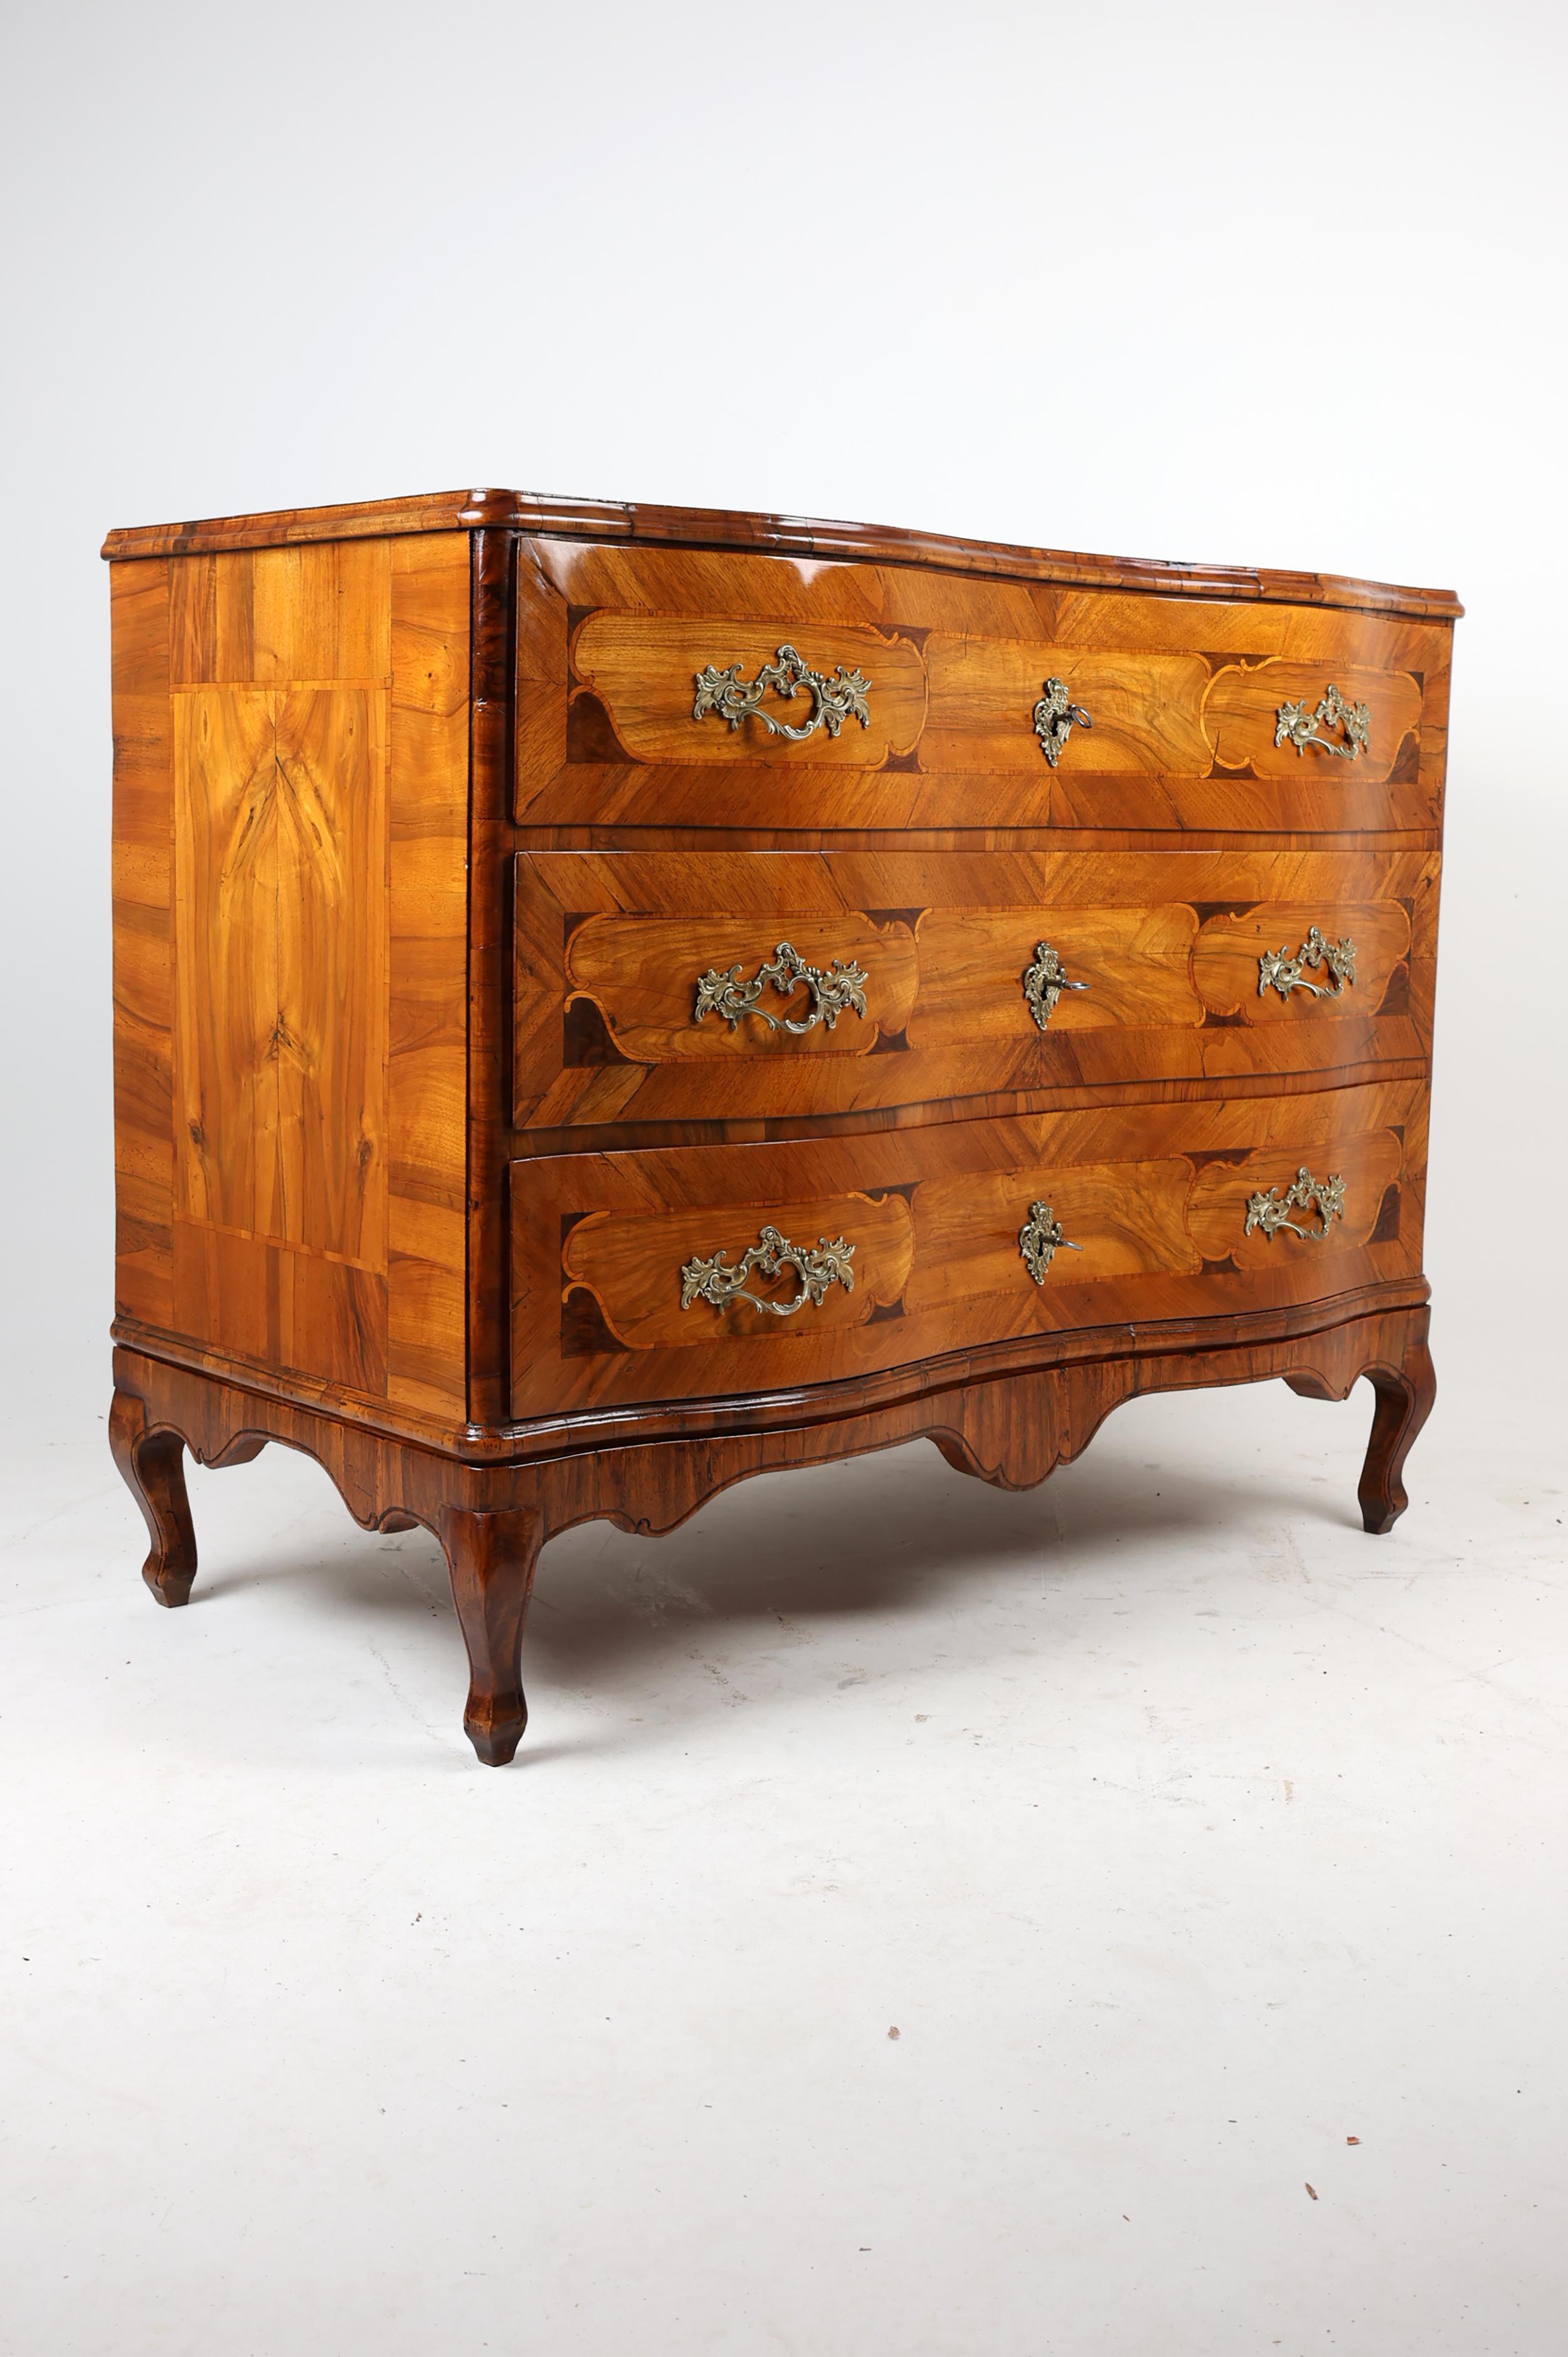 German Late 18th Century Baroque Commode with Burl Walnut For Sale